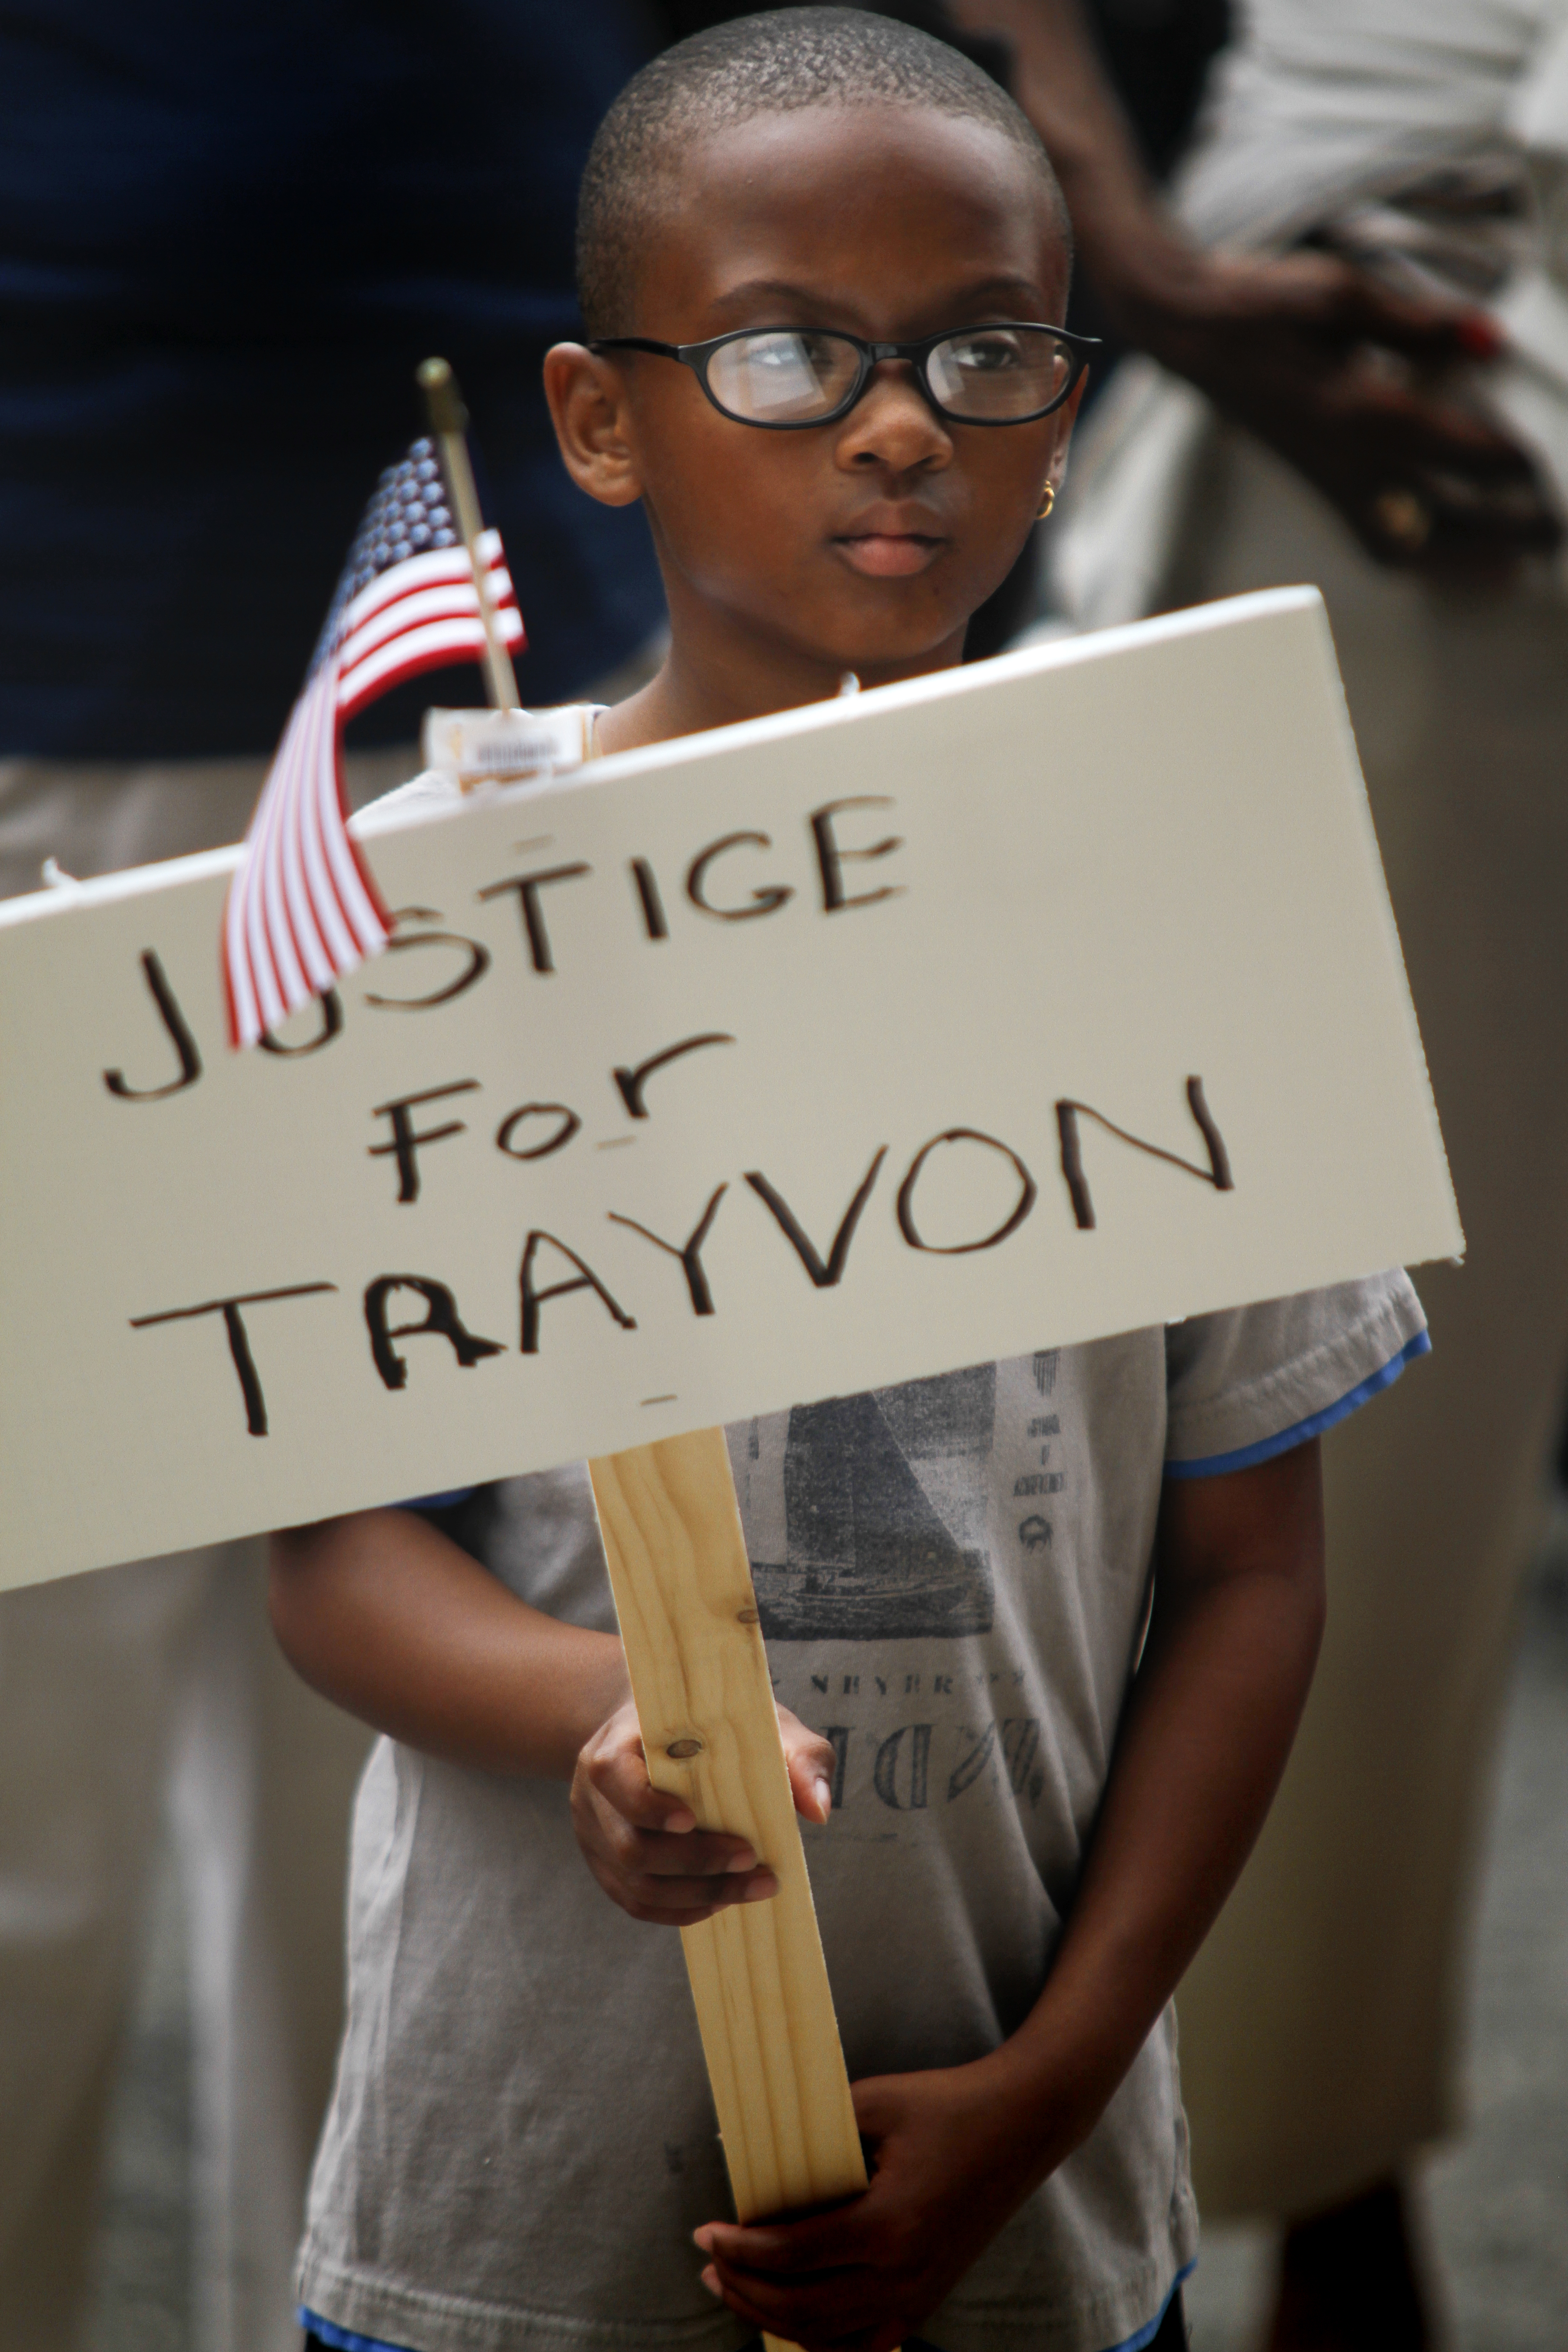 MADELYN P. HASTINGS | THE VINDICATOR

Isaiah Carter, 10, participates in a "Justice for Trayvon" rally on the steps of the Mahoning County Courthouse on Saturday, July 20.  